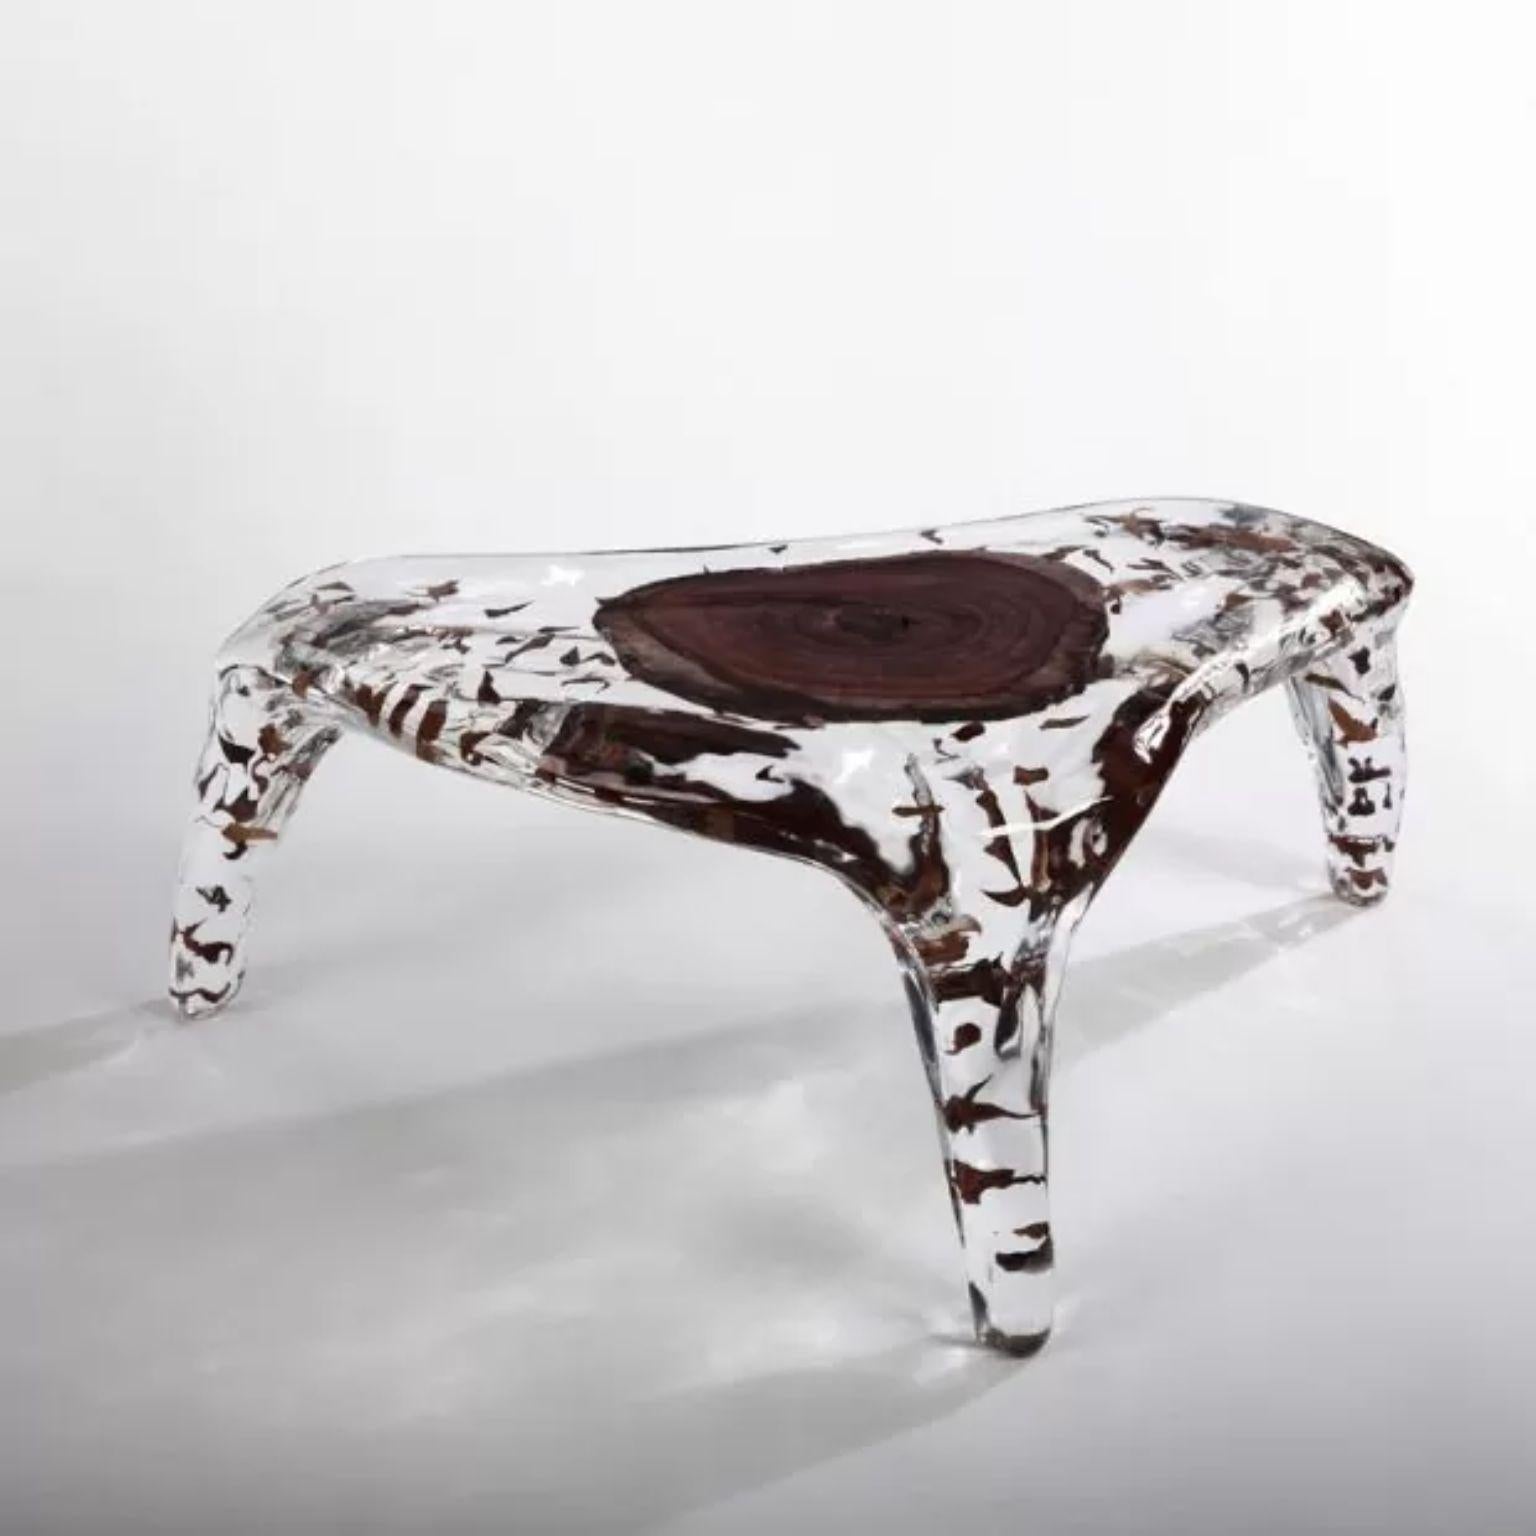 Contemporary Coffee Table by Dainte
One of a Kind.
Dimensions: D 60 x W 114.5 x H 42 cm.
Materials: Crystal and wood.

This coffee table is a marvel of superb craftsmanship and deserves to be the center of attention of any room. With a daring